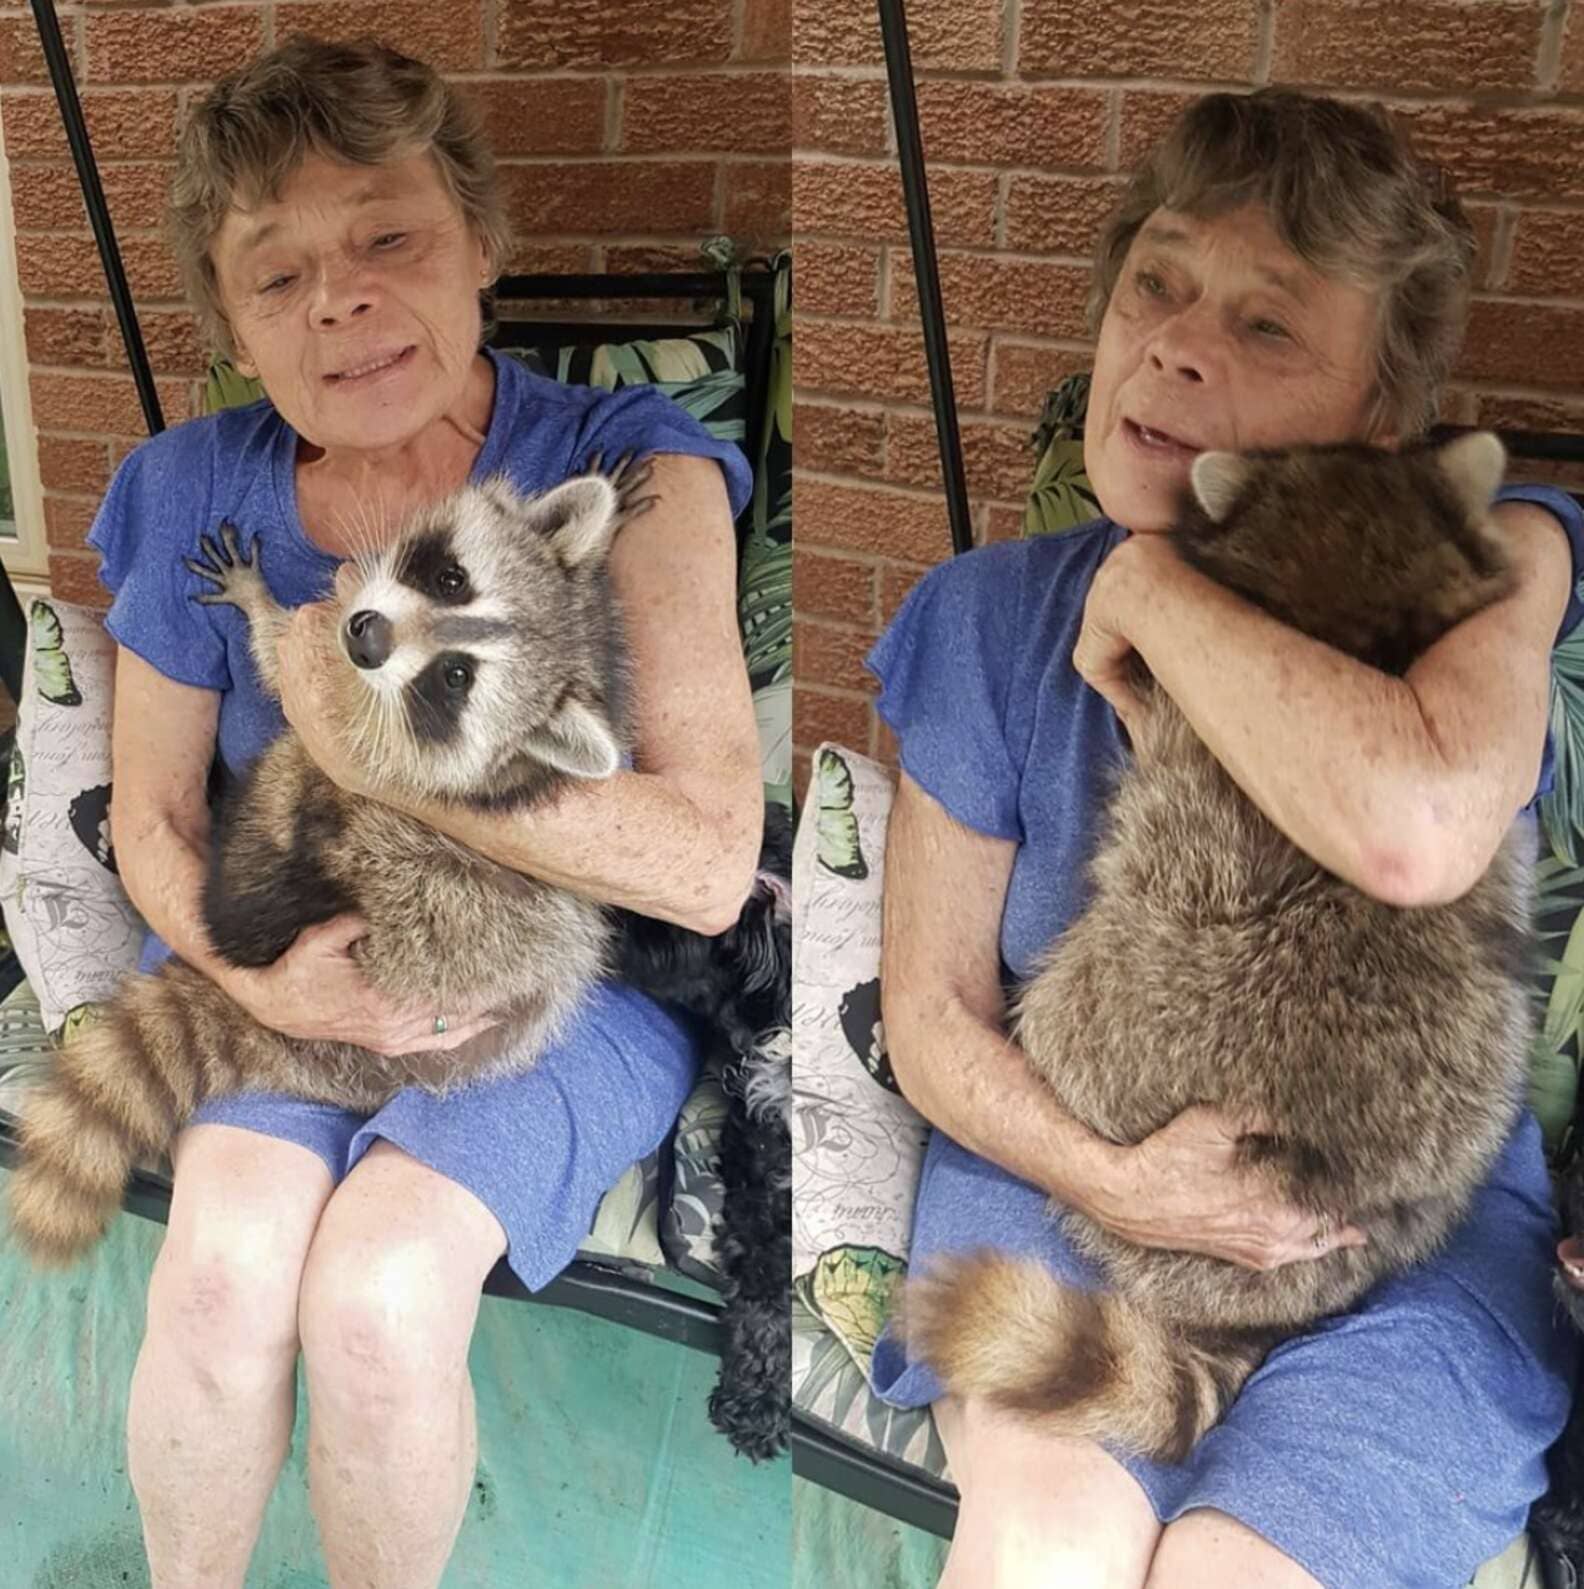 Released back into the wild, this rescued raccoon